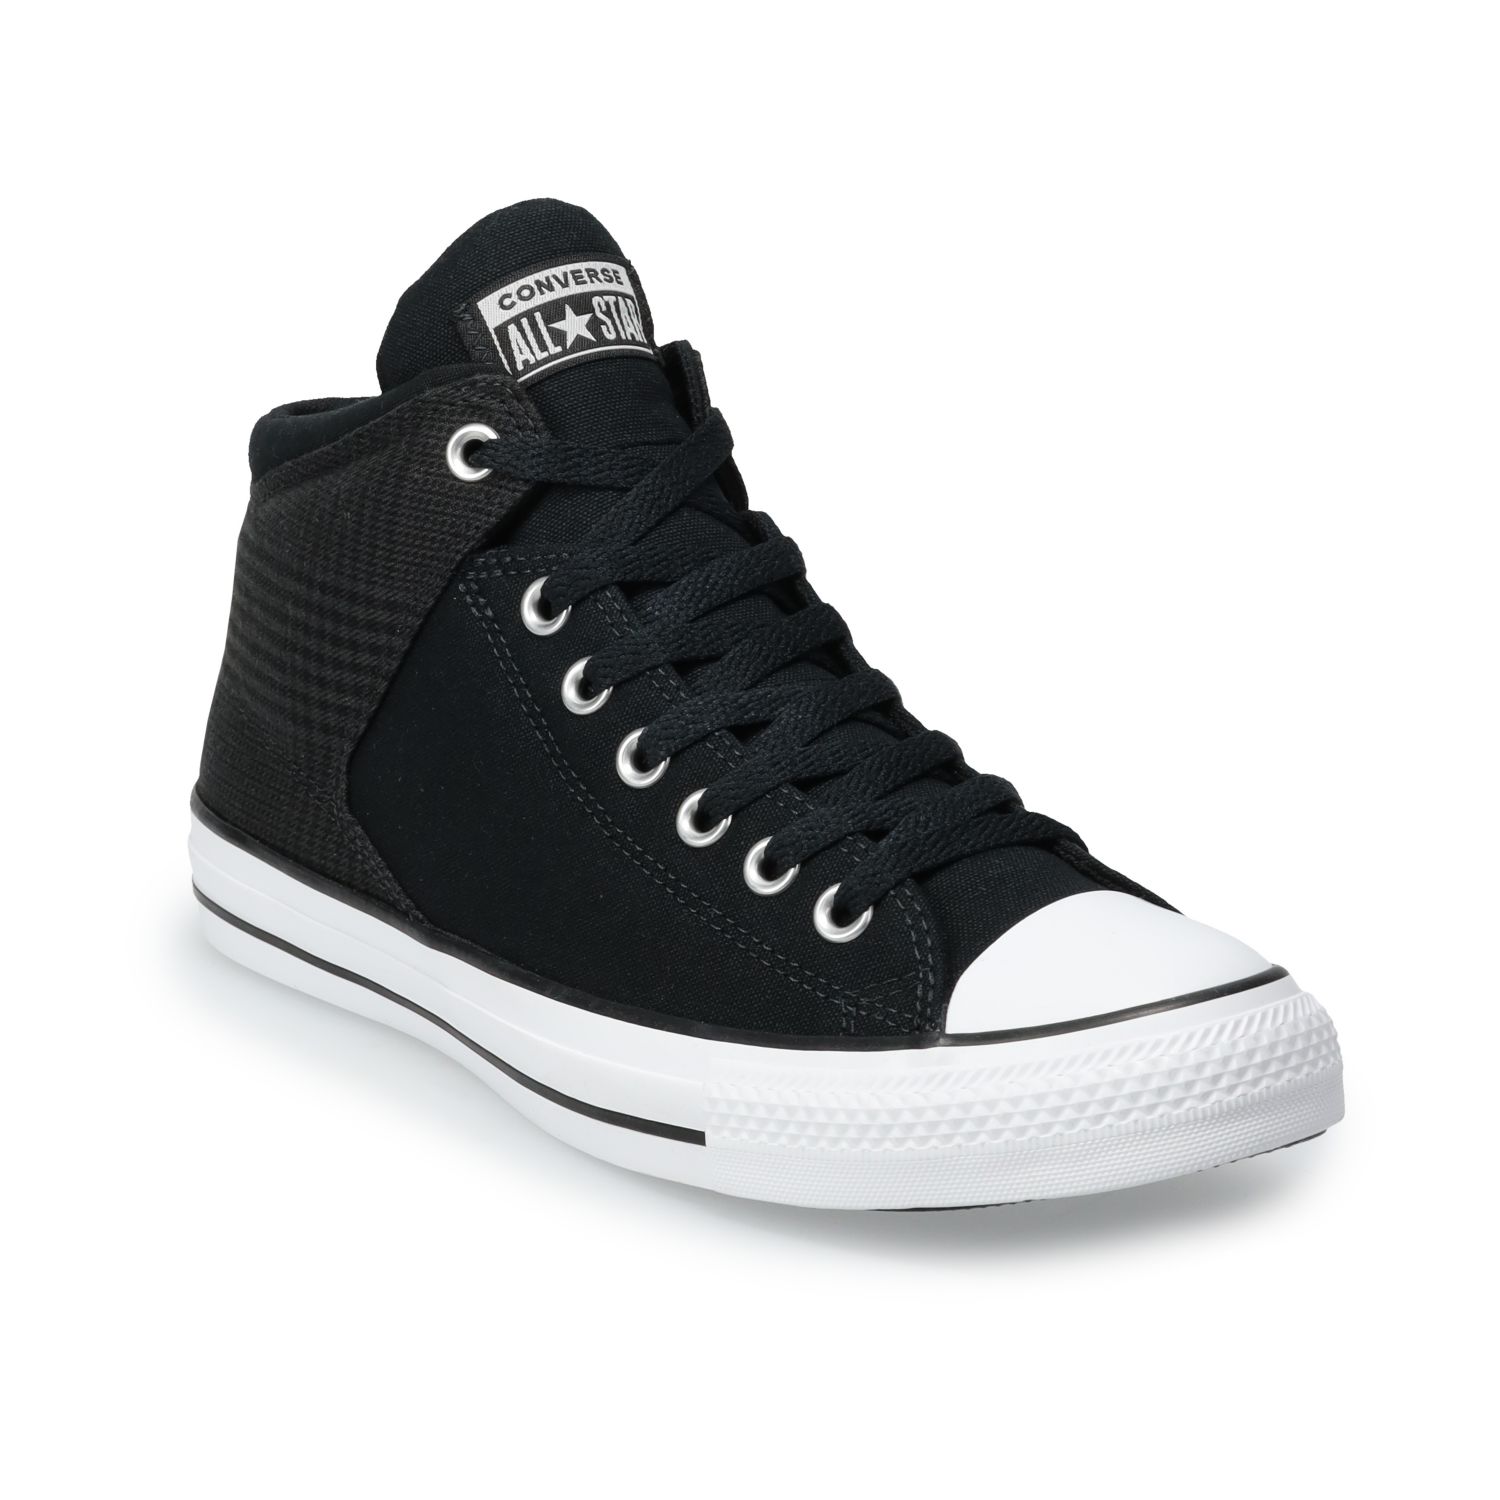 Converse All Star Kohls Discount, SAVE 60%.